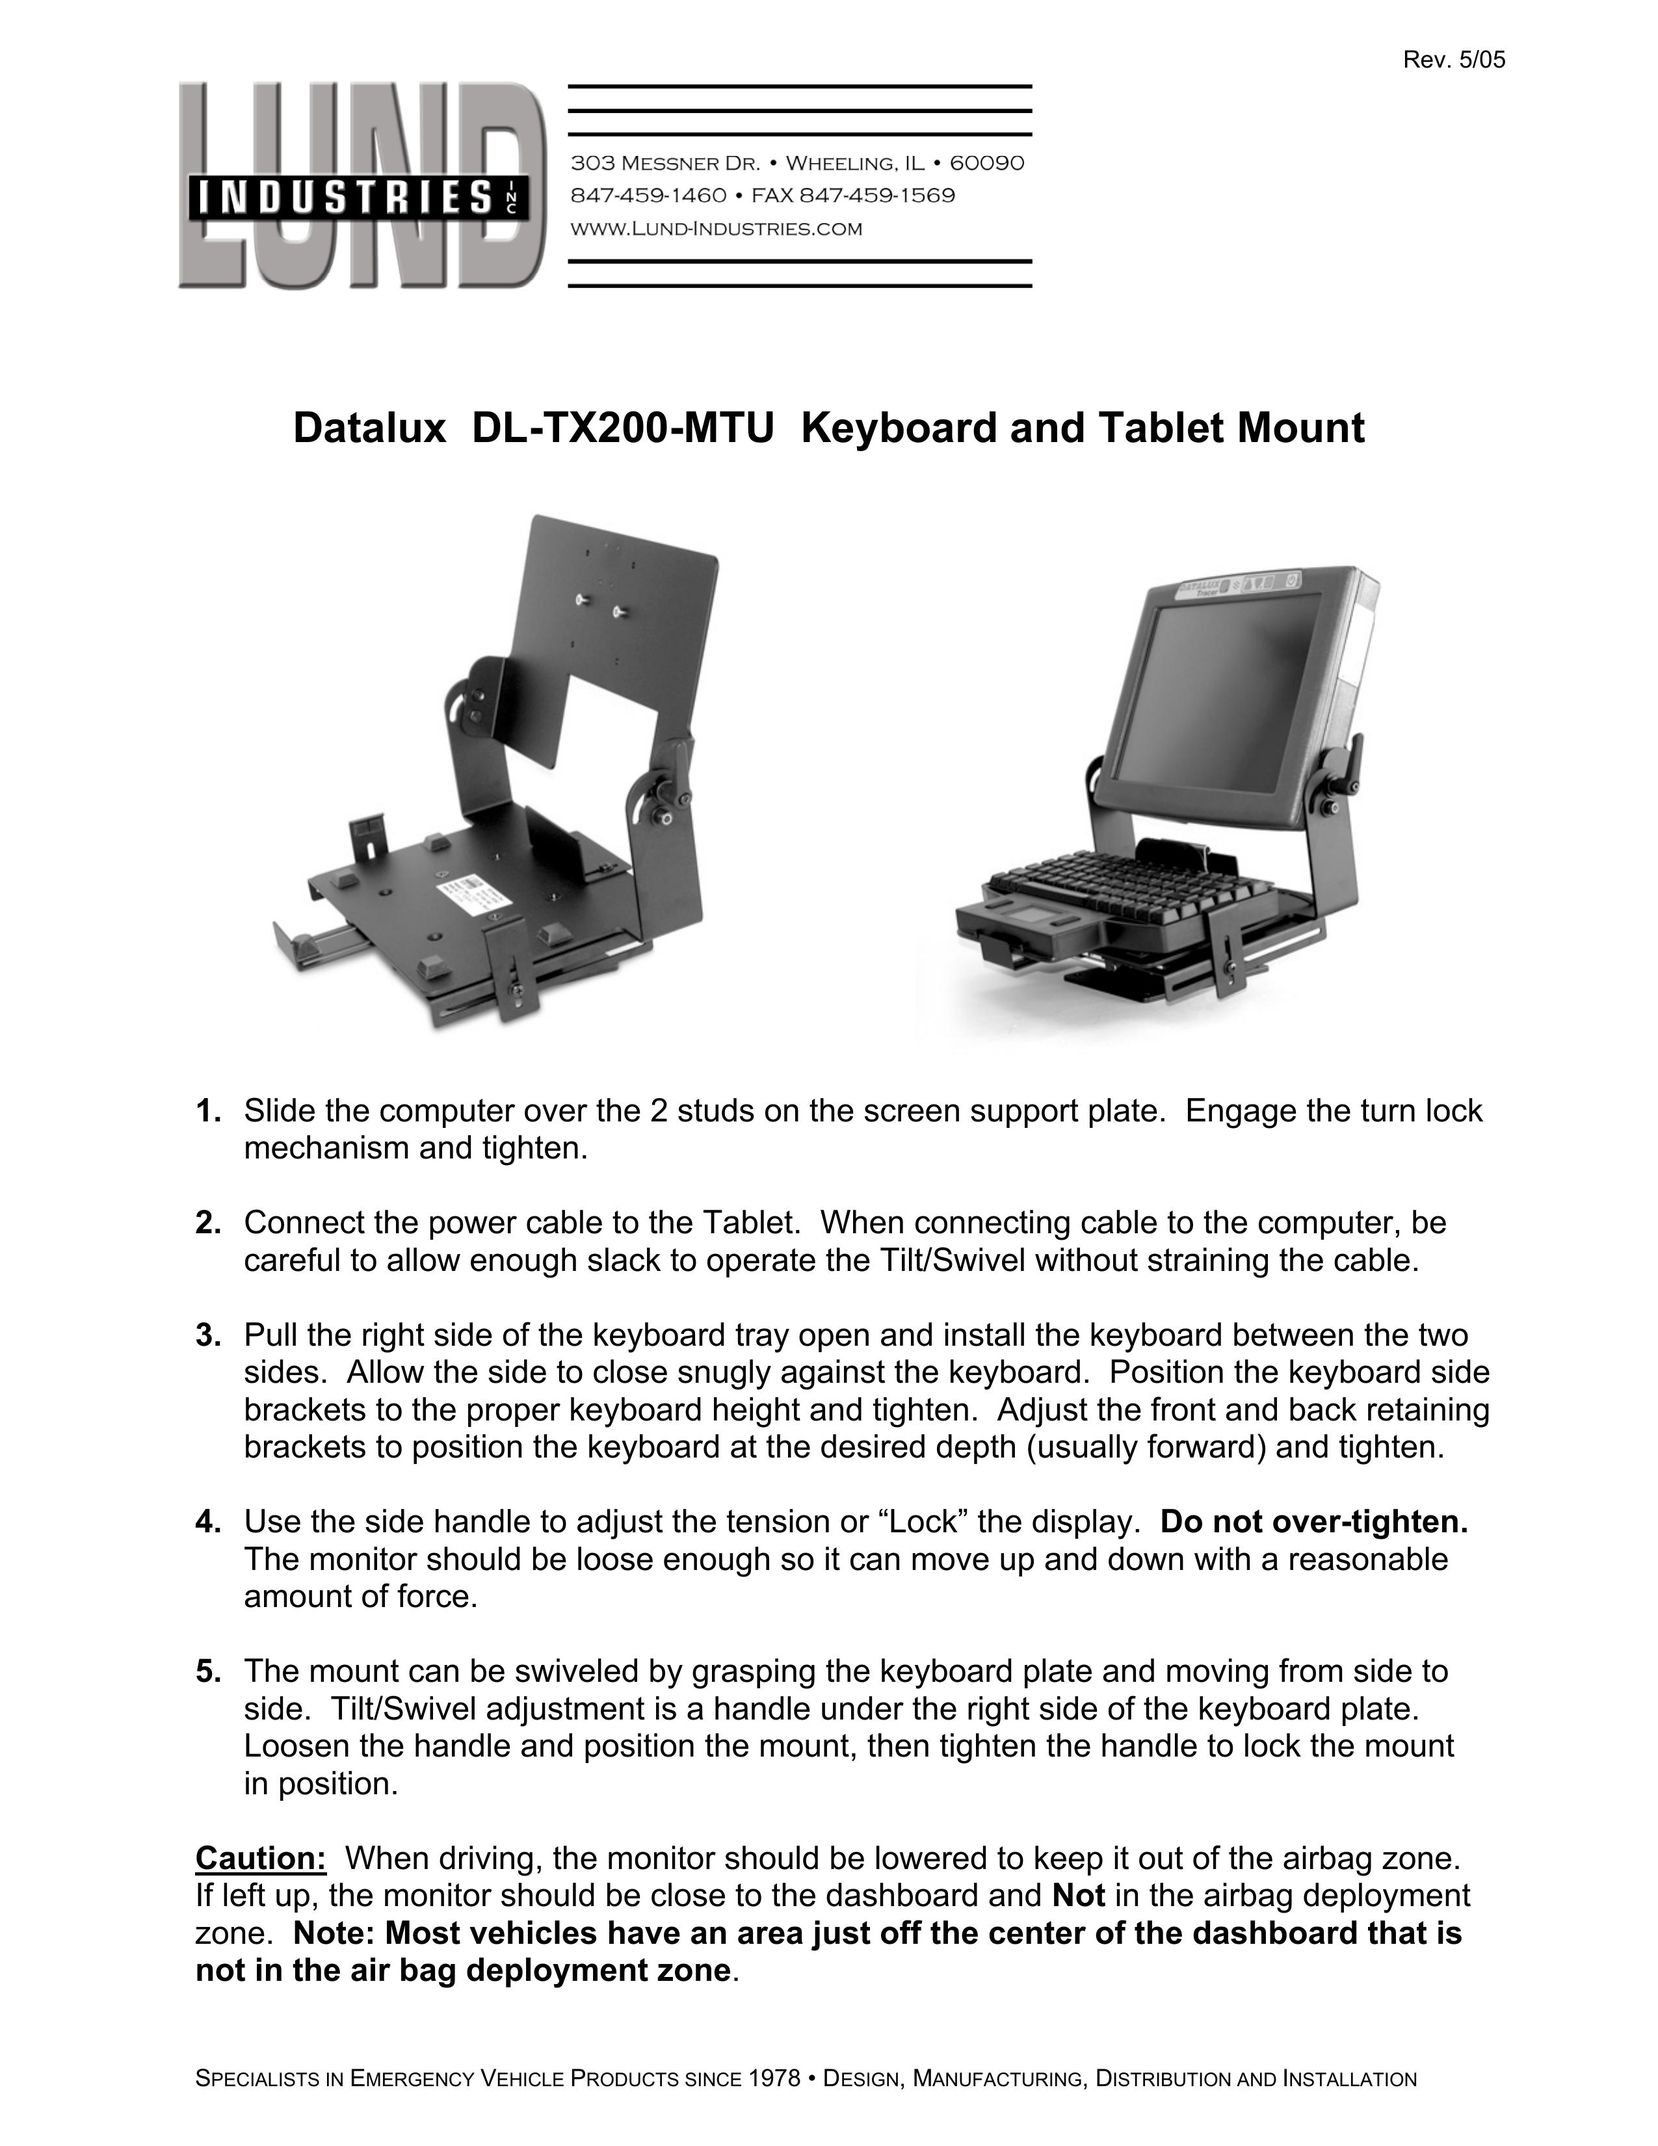 Lund Industries DL-TX200 Mouse User Manual